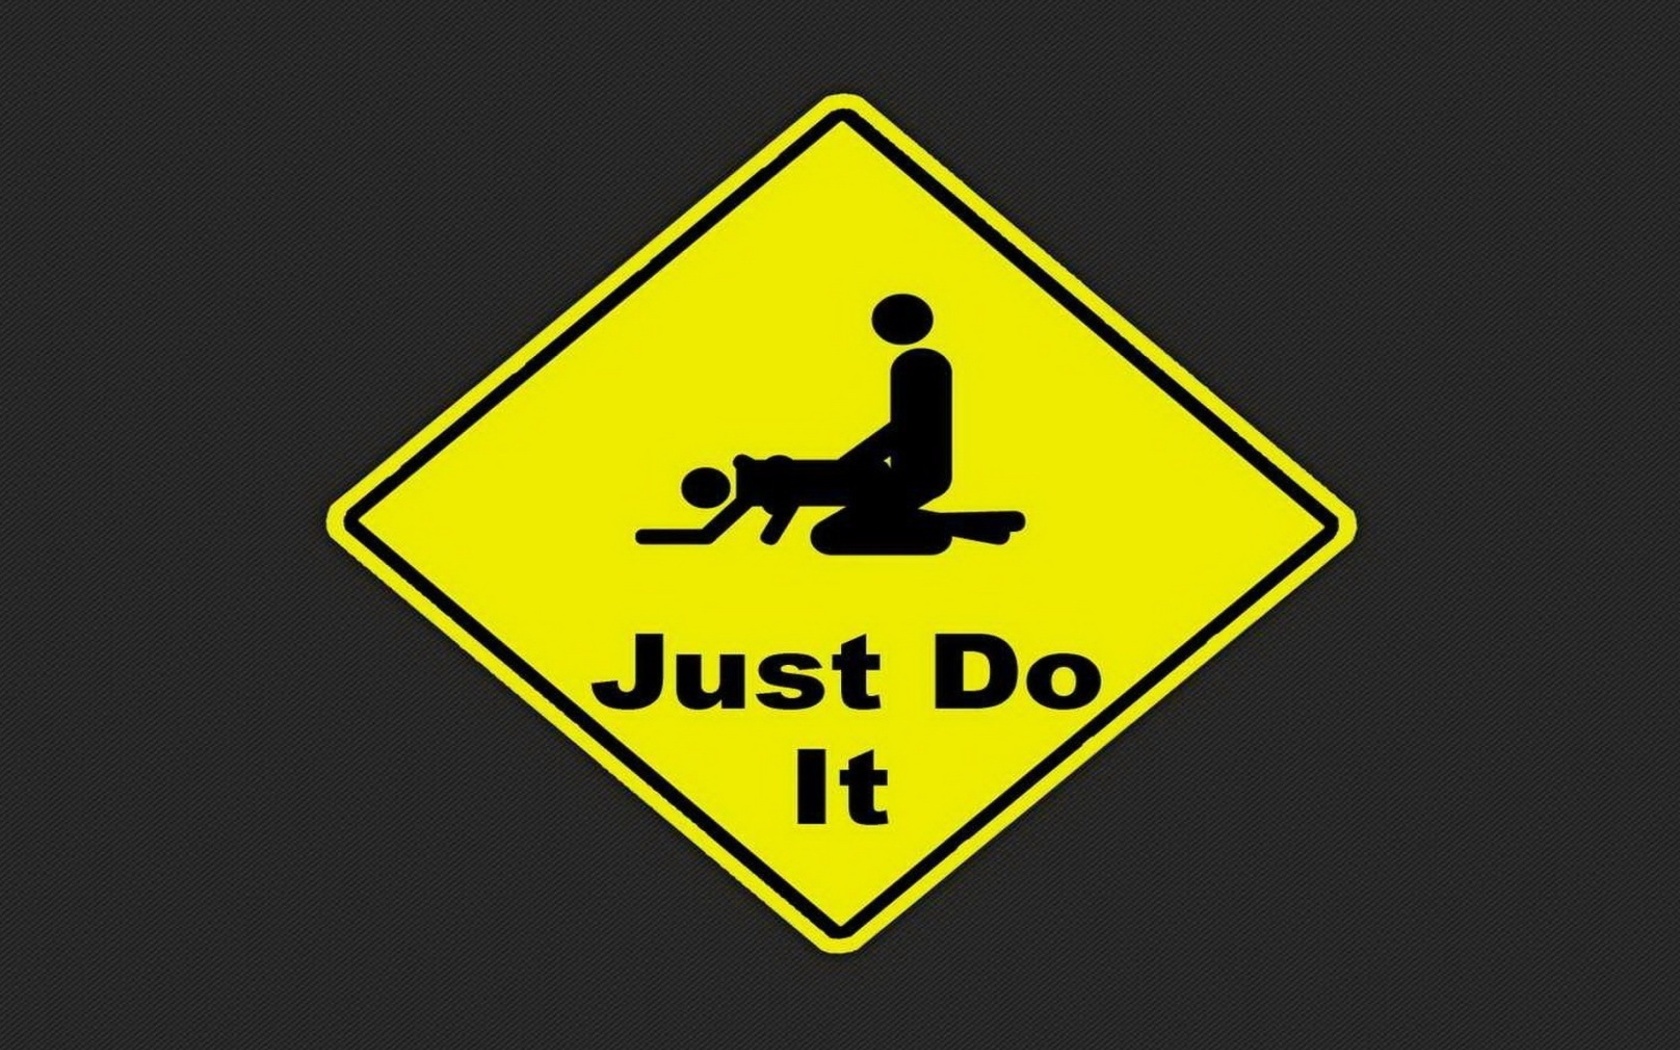 Just Do It Funny Sign screenshot #1 1680x1050